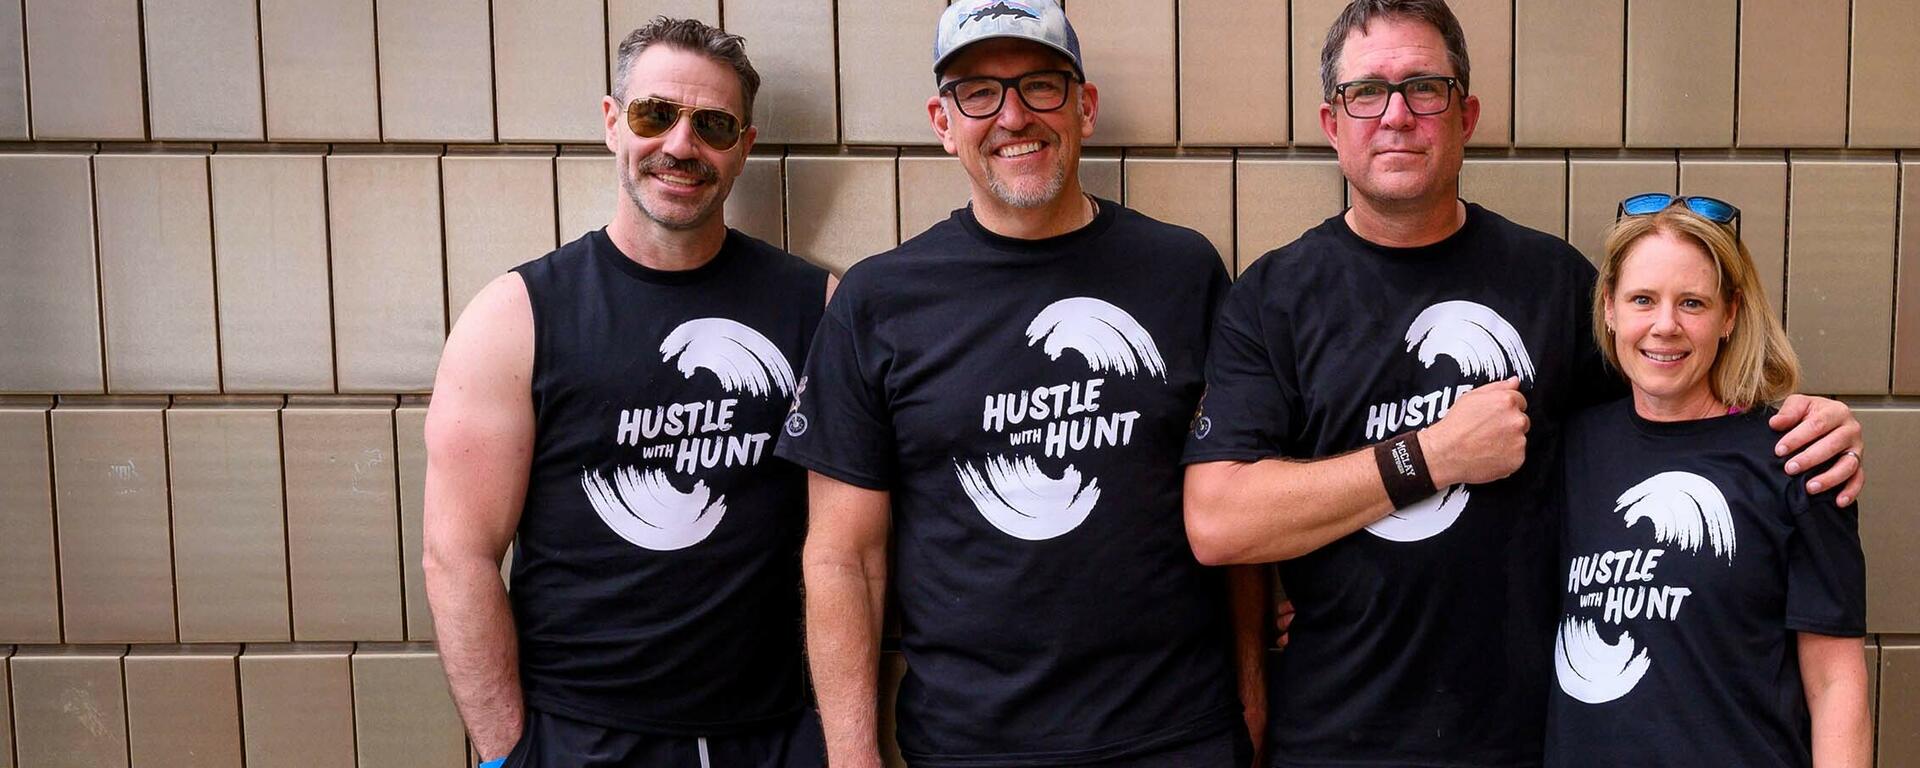 Dr. Matthew Hill, Rob Hunt, Trevor Johnston and Lindsey McKay stand together wearing Hustle with Hunt t-shirts.